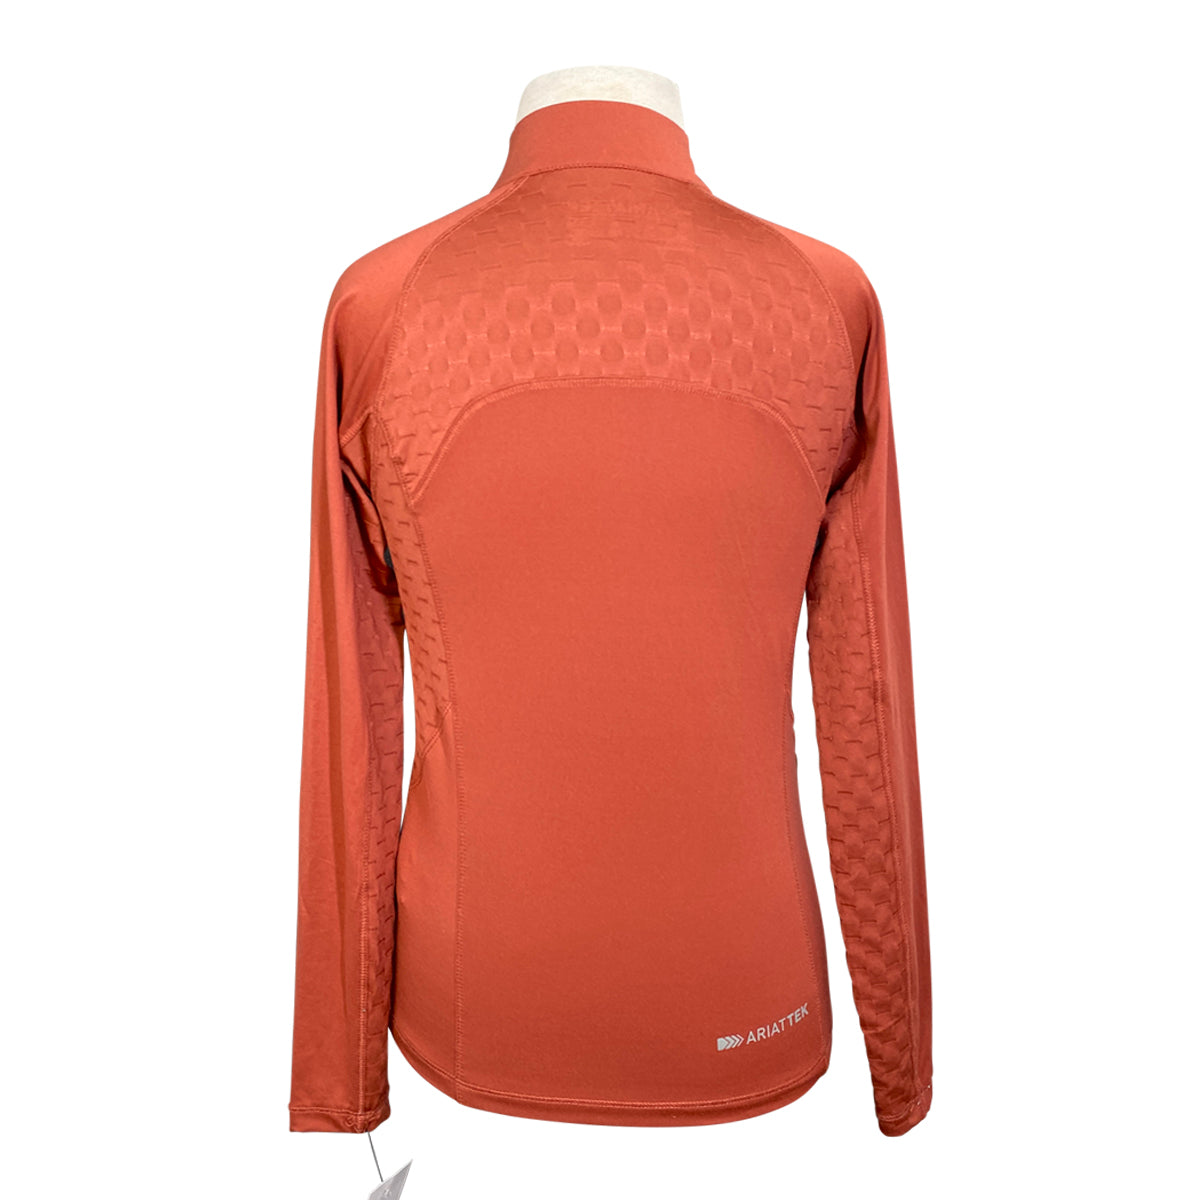 Ariat 'Lowell 2.0' 1/4 Zip Shirt in Deep Coral